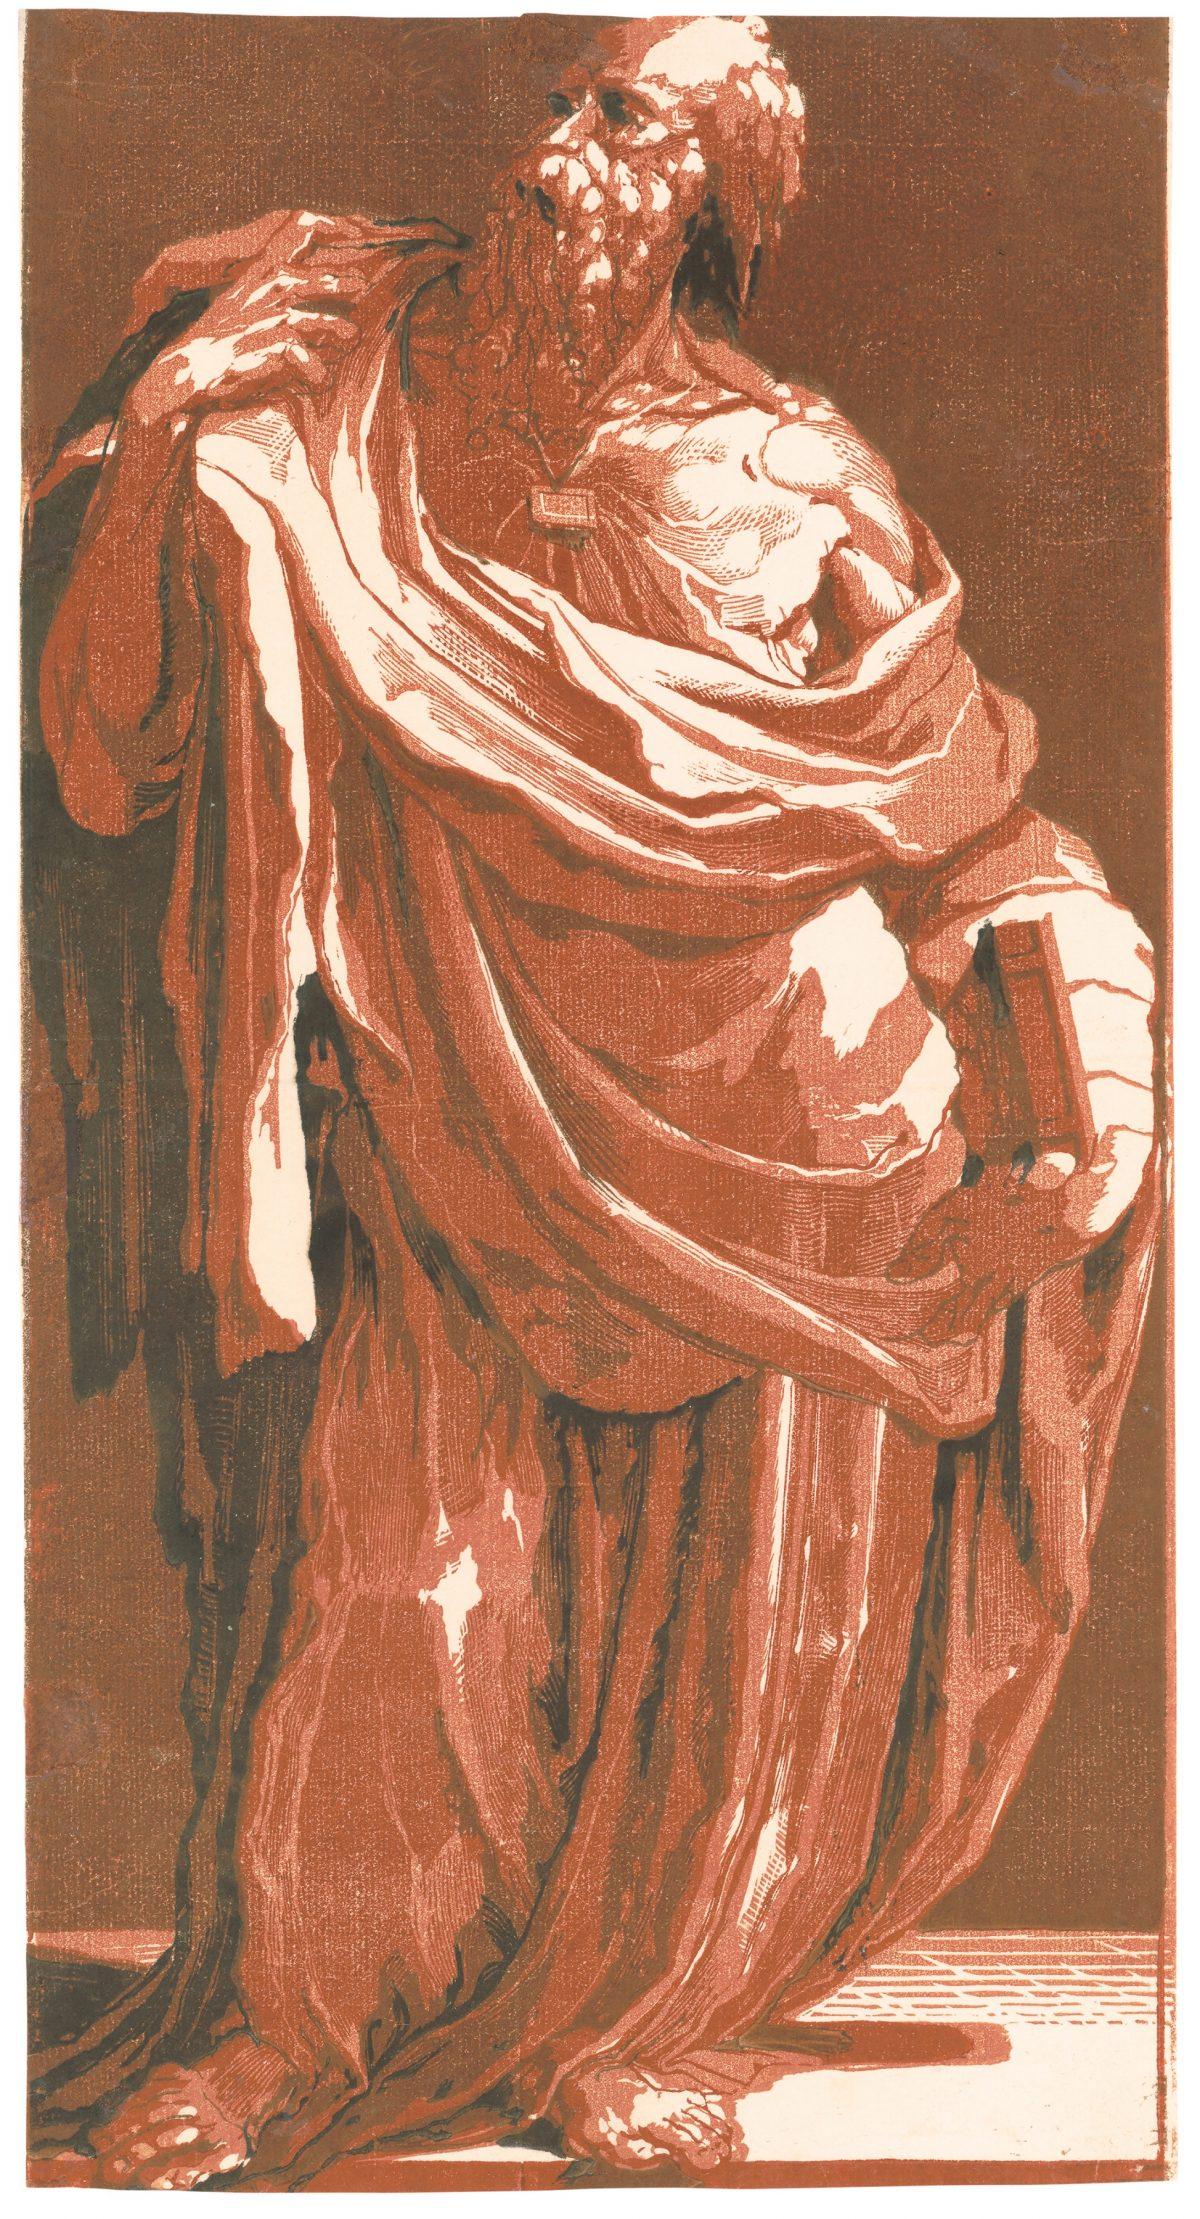 “Apostle With a Book,” circa 1540s, by Domenico Beccafumi. Chiaroscuro woodcut from four blocks in light red, medium red, gray-red, and black, 15 15/16 inches by 8 7/16 inches. (Library of Congress, Prints and Photographs Division, Washington, D.C.)